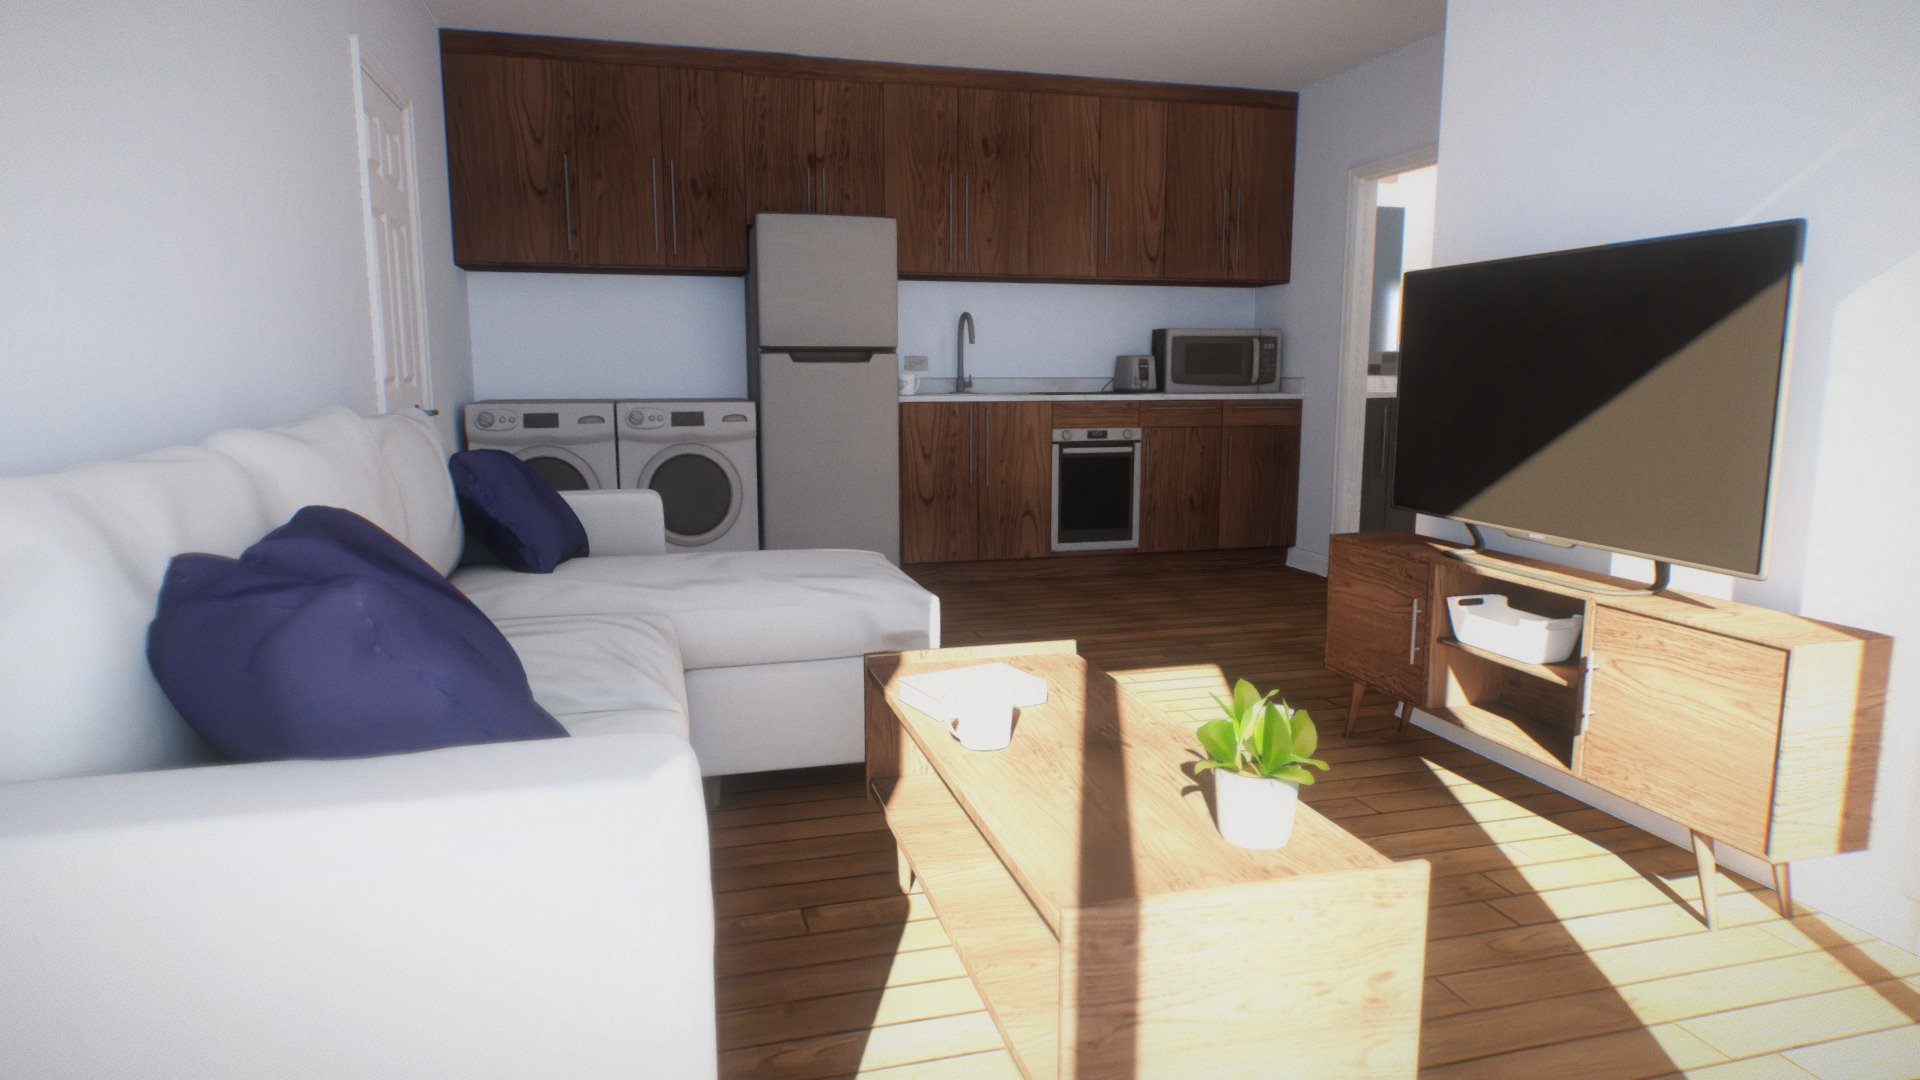 A modern apartment created in one week with Blender 2.9.  Designed for use in VR, all furniture is realistically scaled and appropriately detailed (though some texture data was lost when baking the textures). Baked lighting is diffuse only, based on albedo and normal maps, when available.  All models and textures were created by me.

Note: Additional unbaked Blender project file sporting original UVs/textures is included with the download - Modern High-Rise Apartment (VR Scaled) - Buy Royalty Free 3D model by LoneDeveloper 3d model